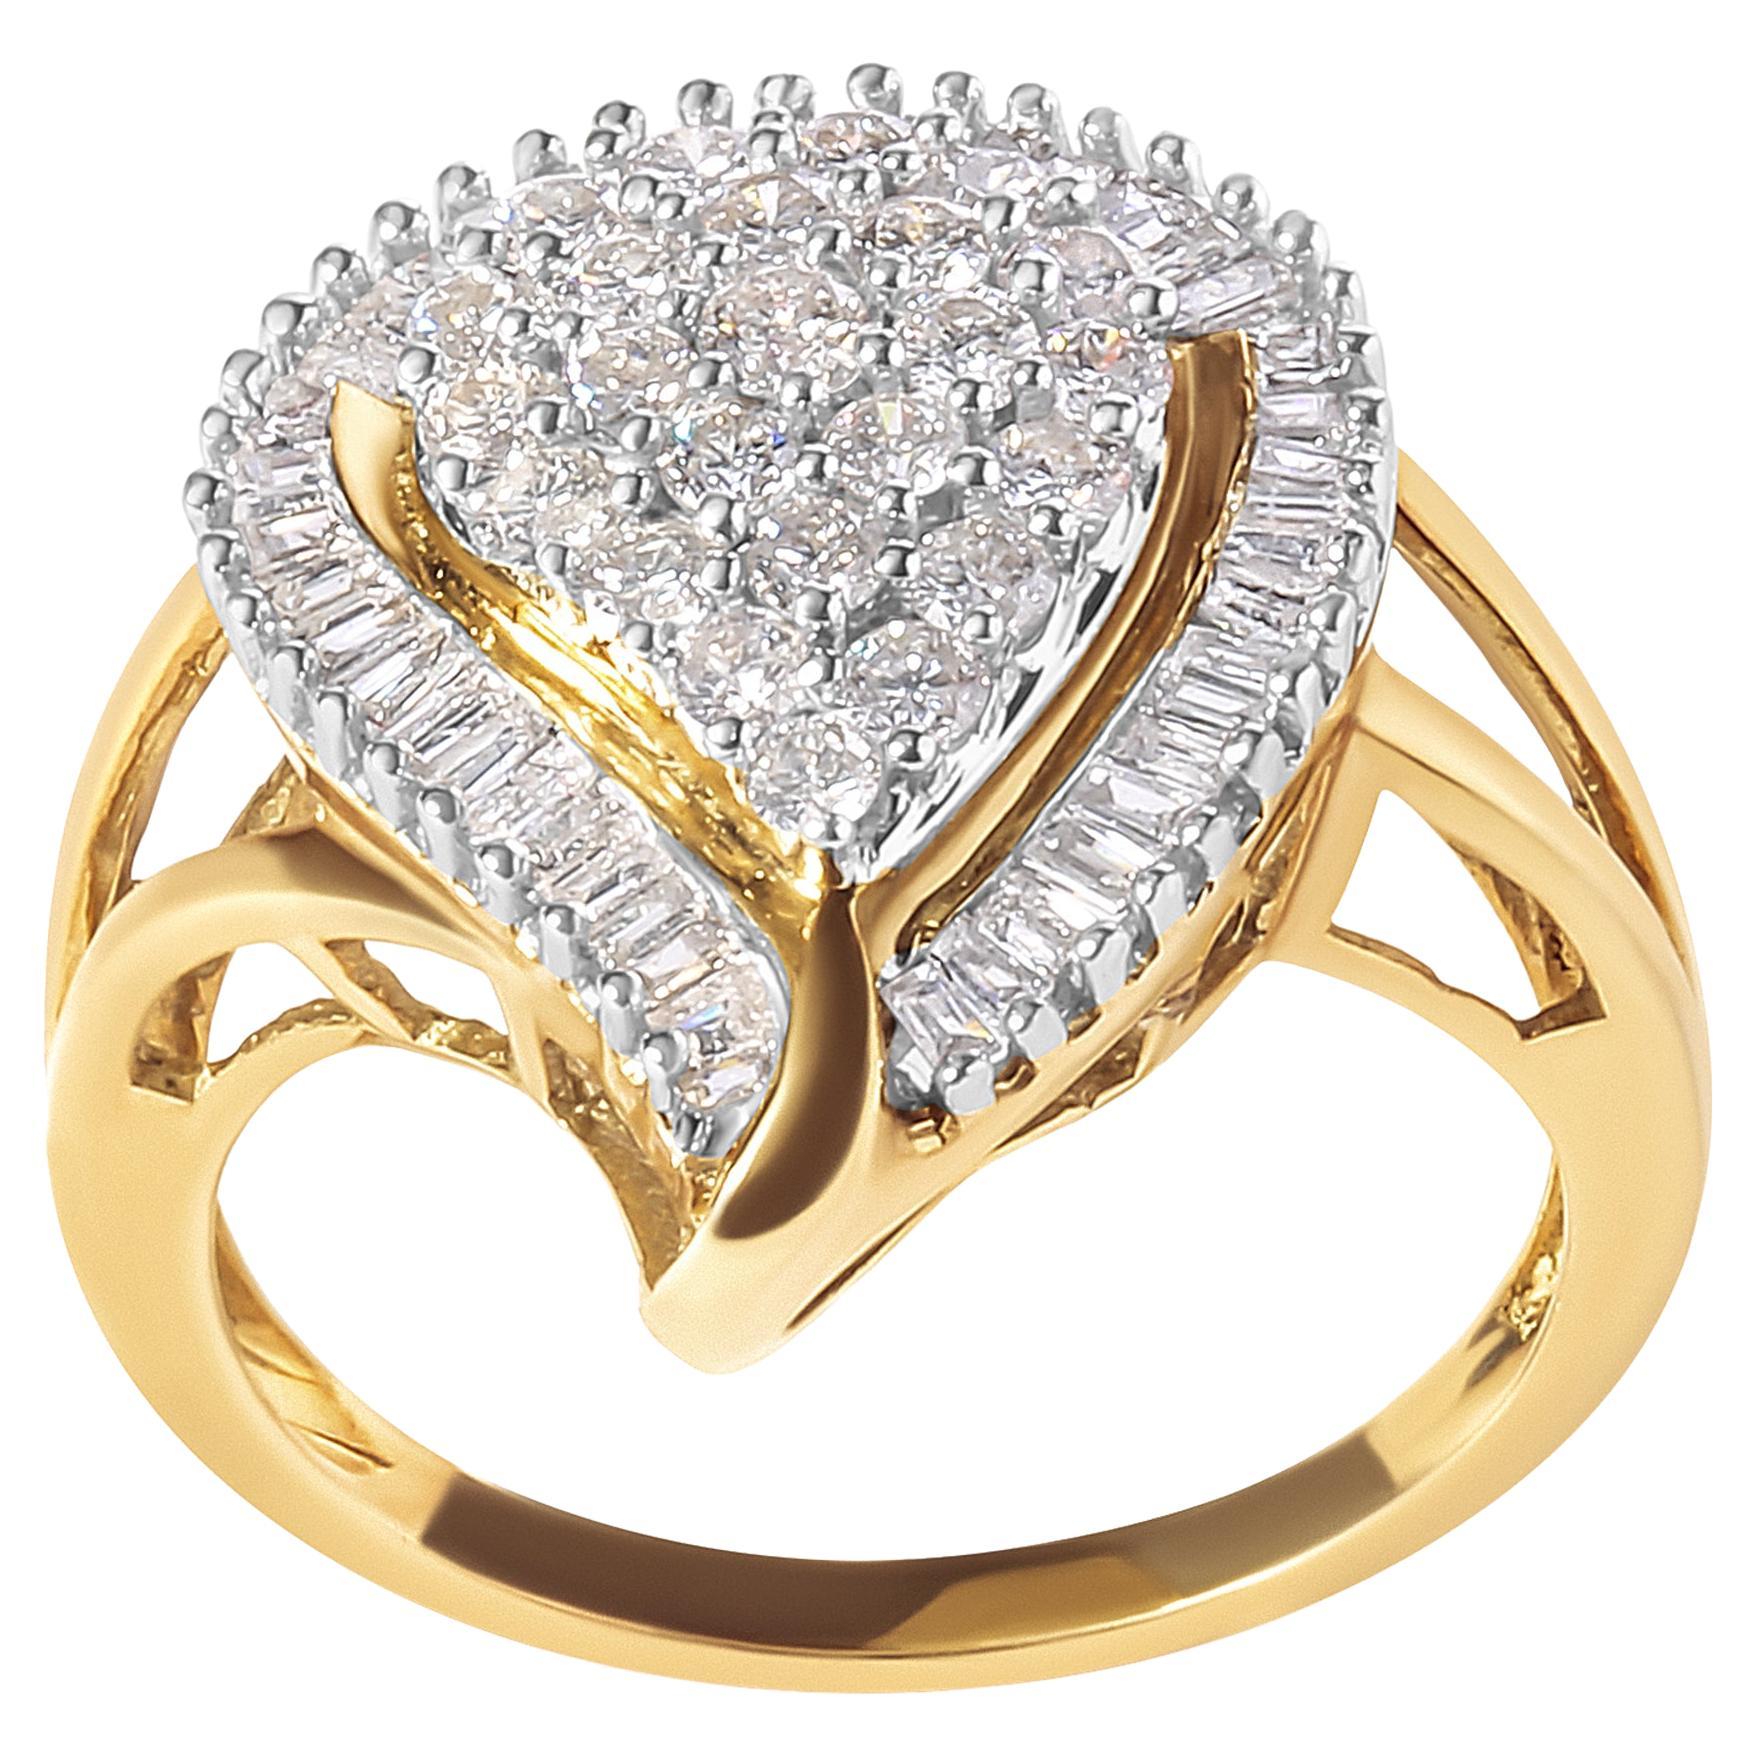 10K Yellow Gold 1.0 Carat Round and Baguette Cut Diamond Ballerina Cluster Ring